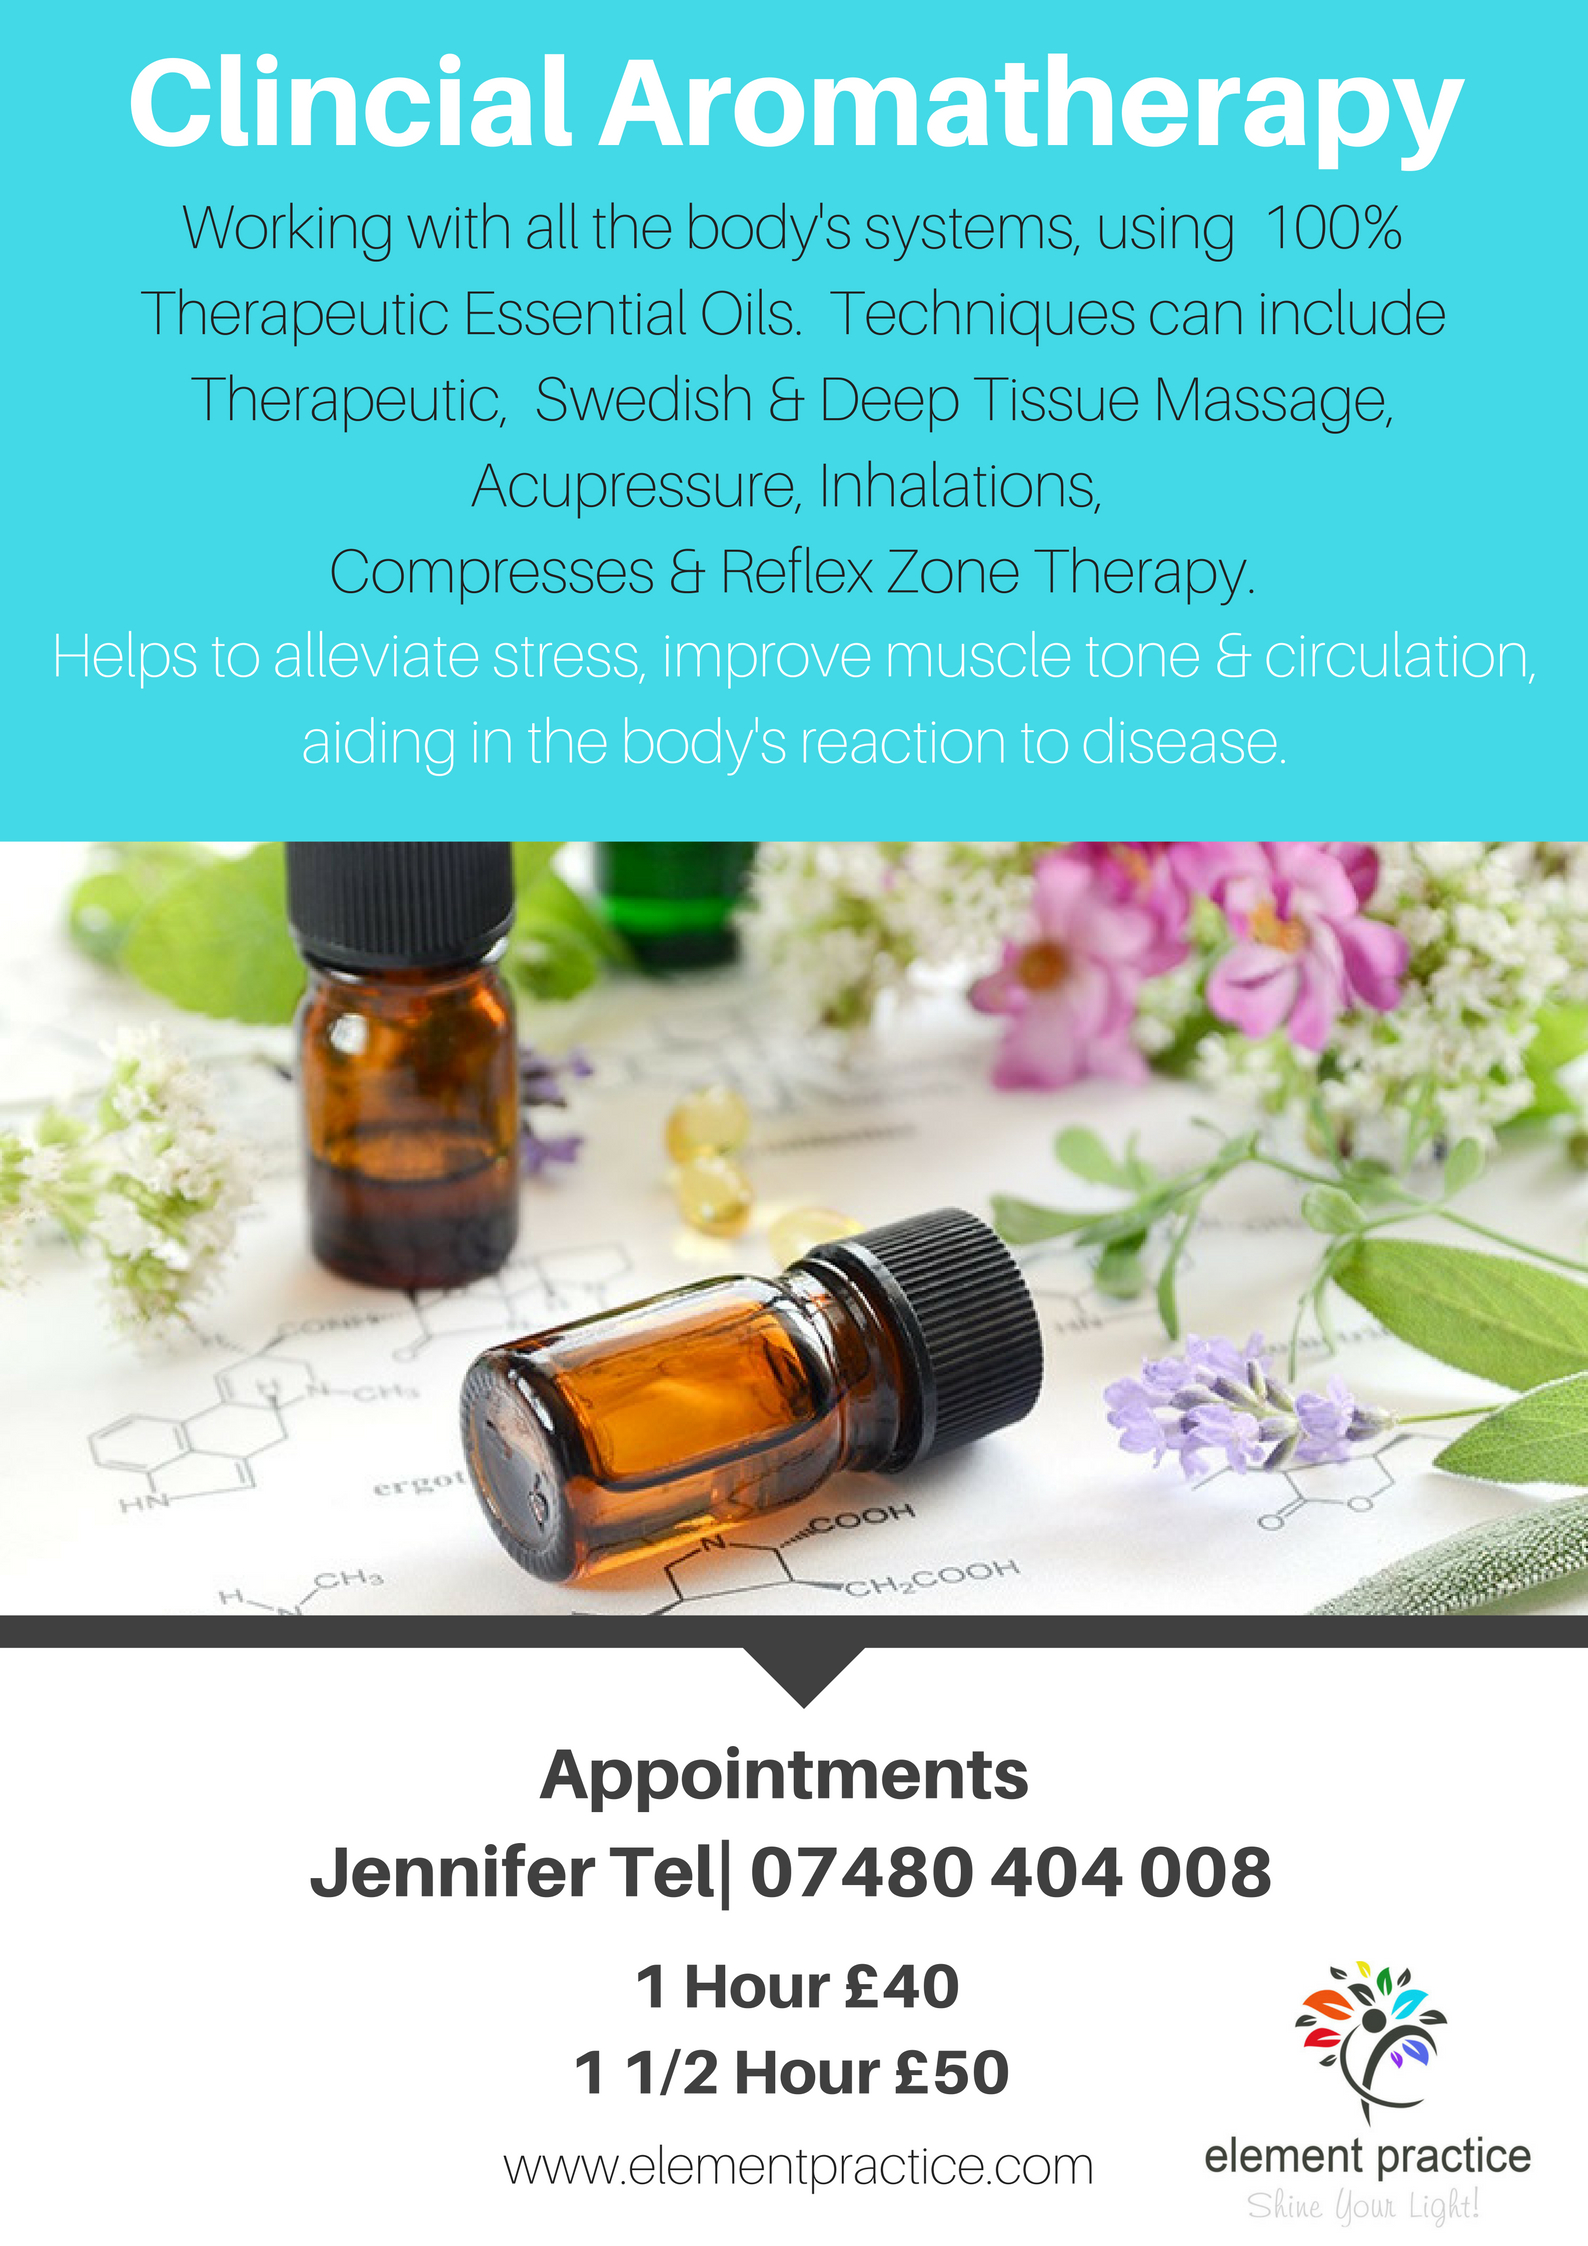 Complementary Therapies